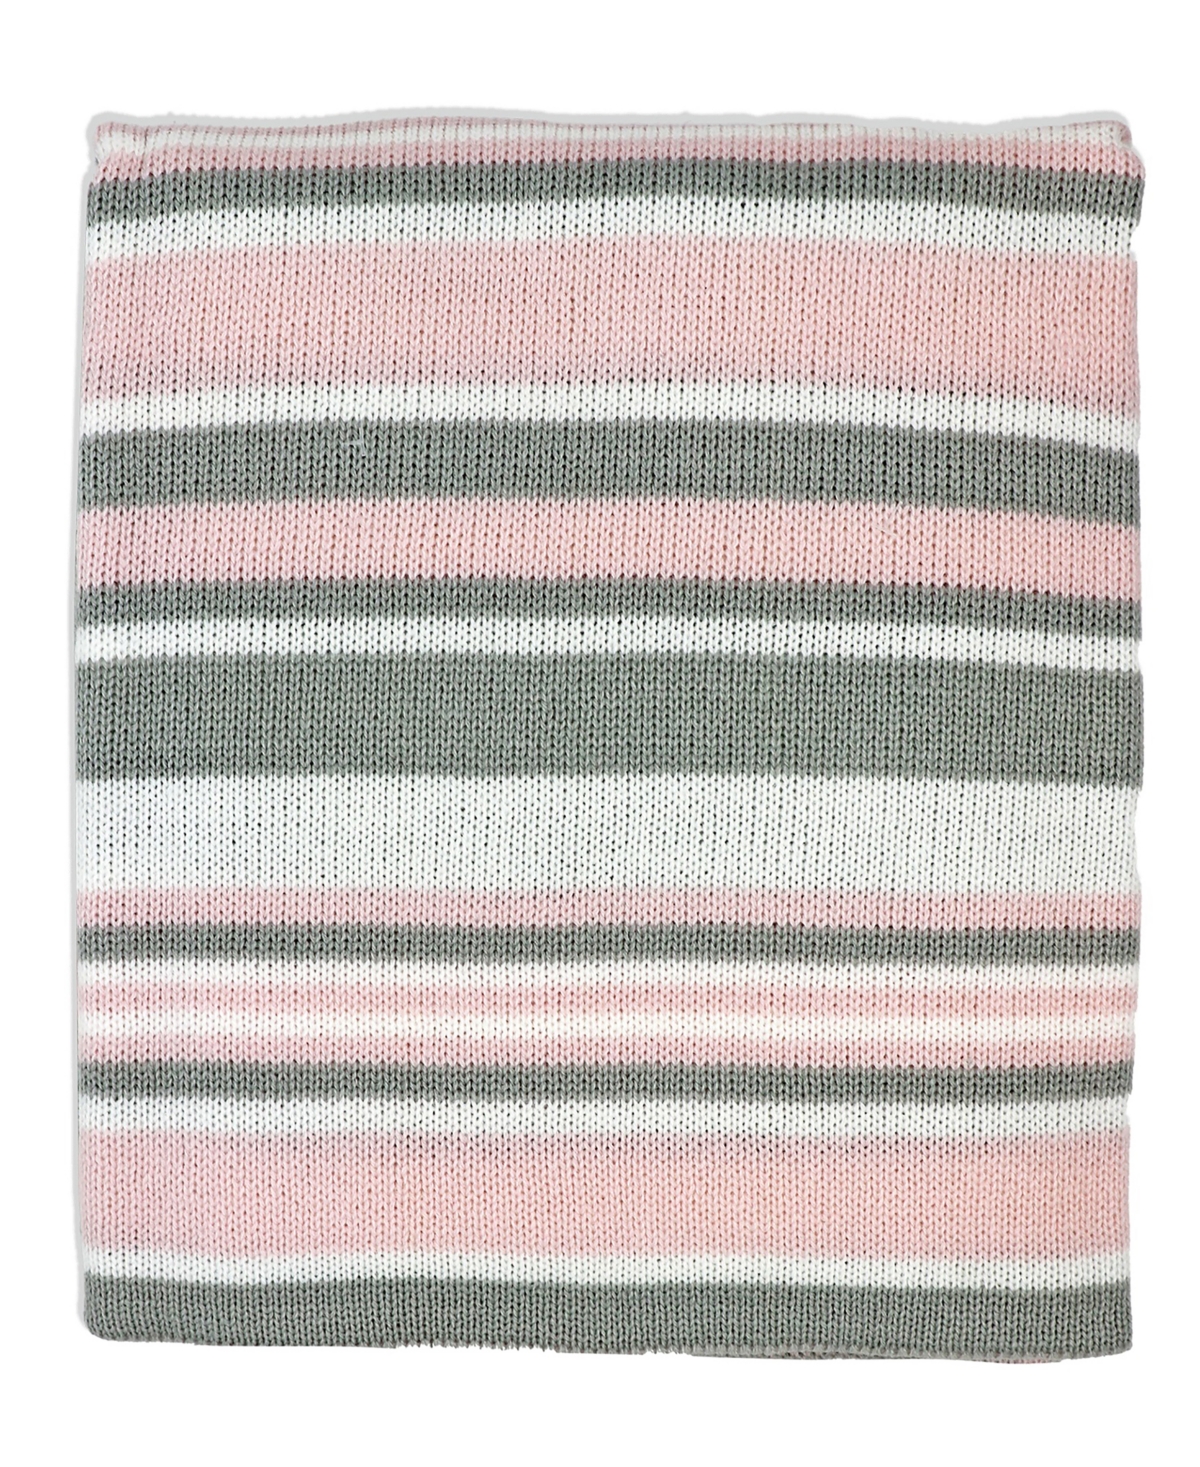 3 Stories Trading Baby Girls Cozy Striped Knit Blanket In Pink And Gray